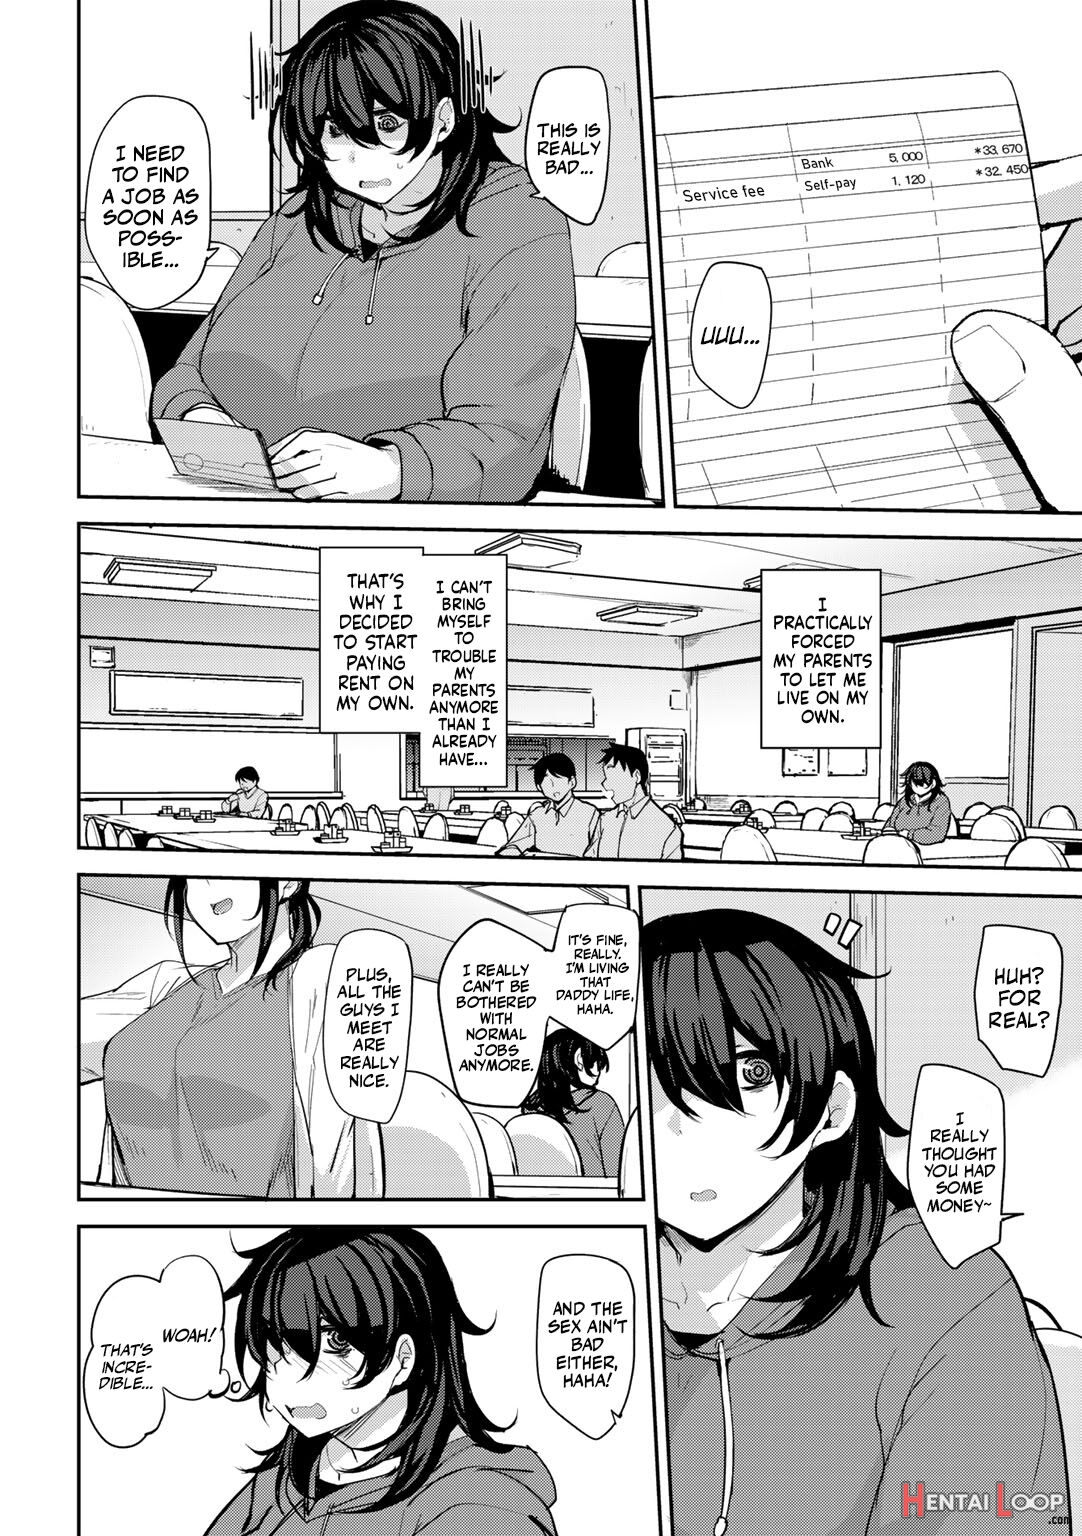 Maki's Coital Contract - Part 1 page 2